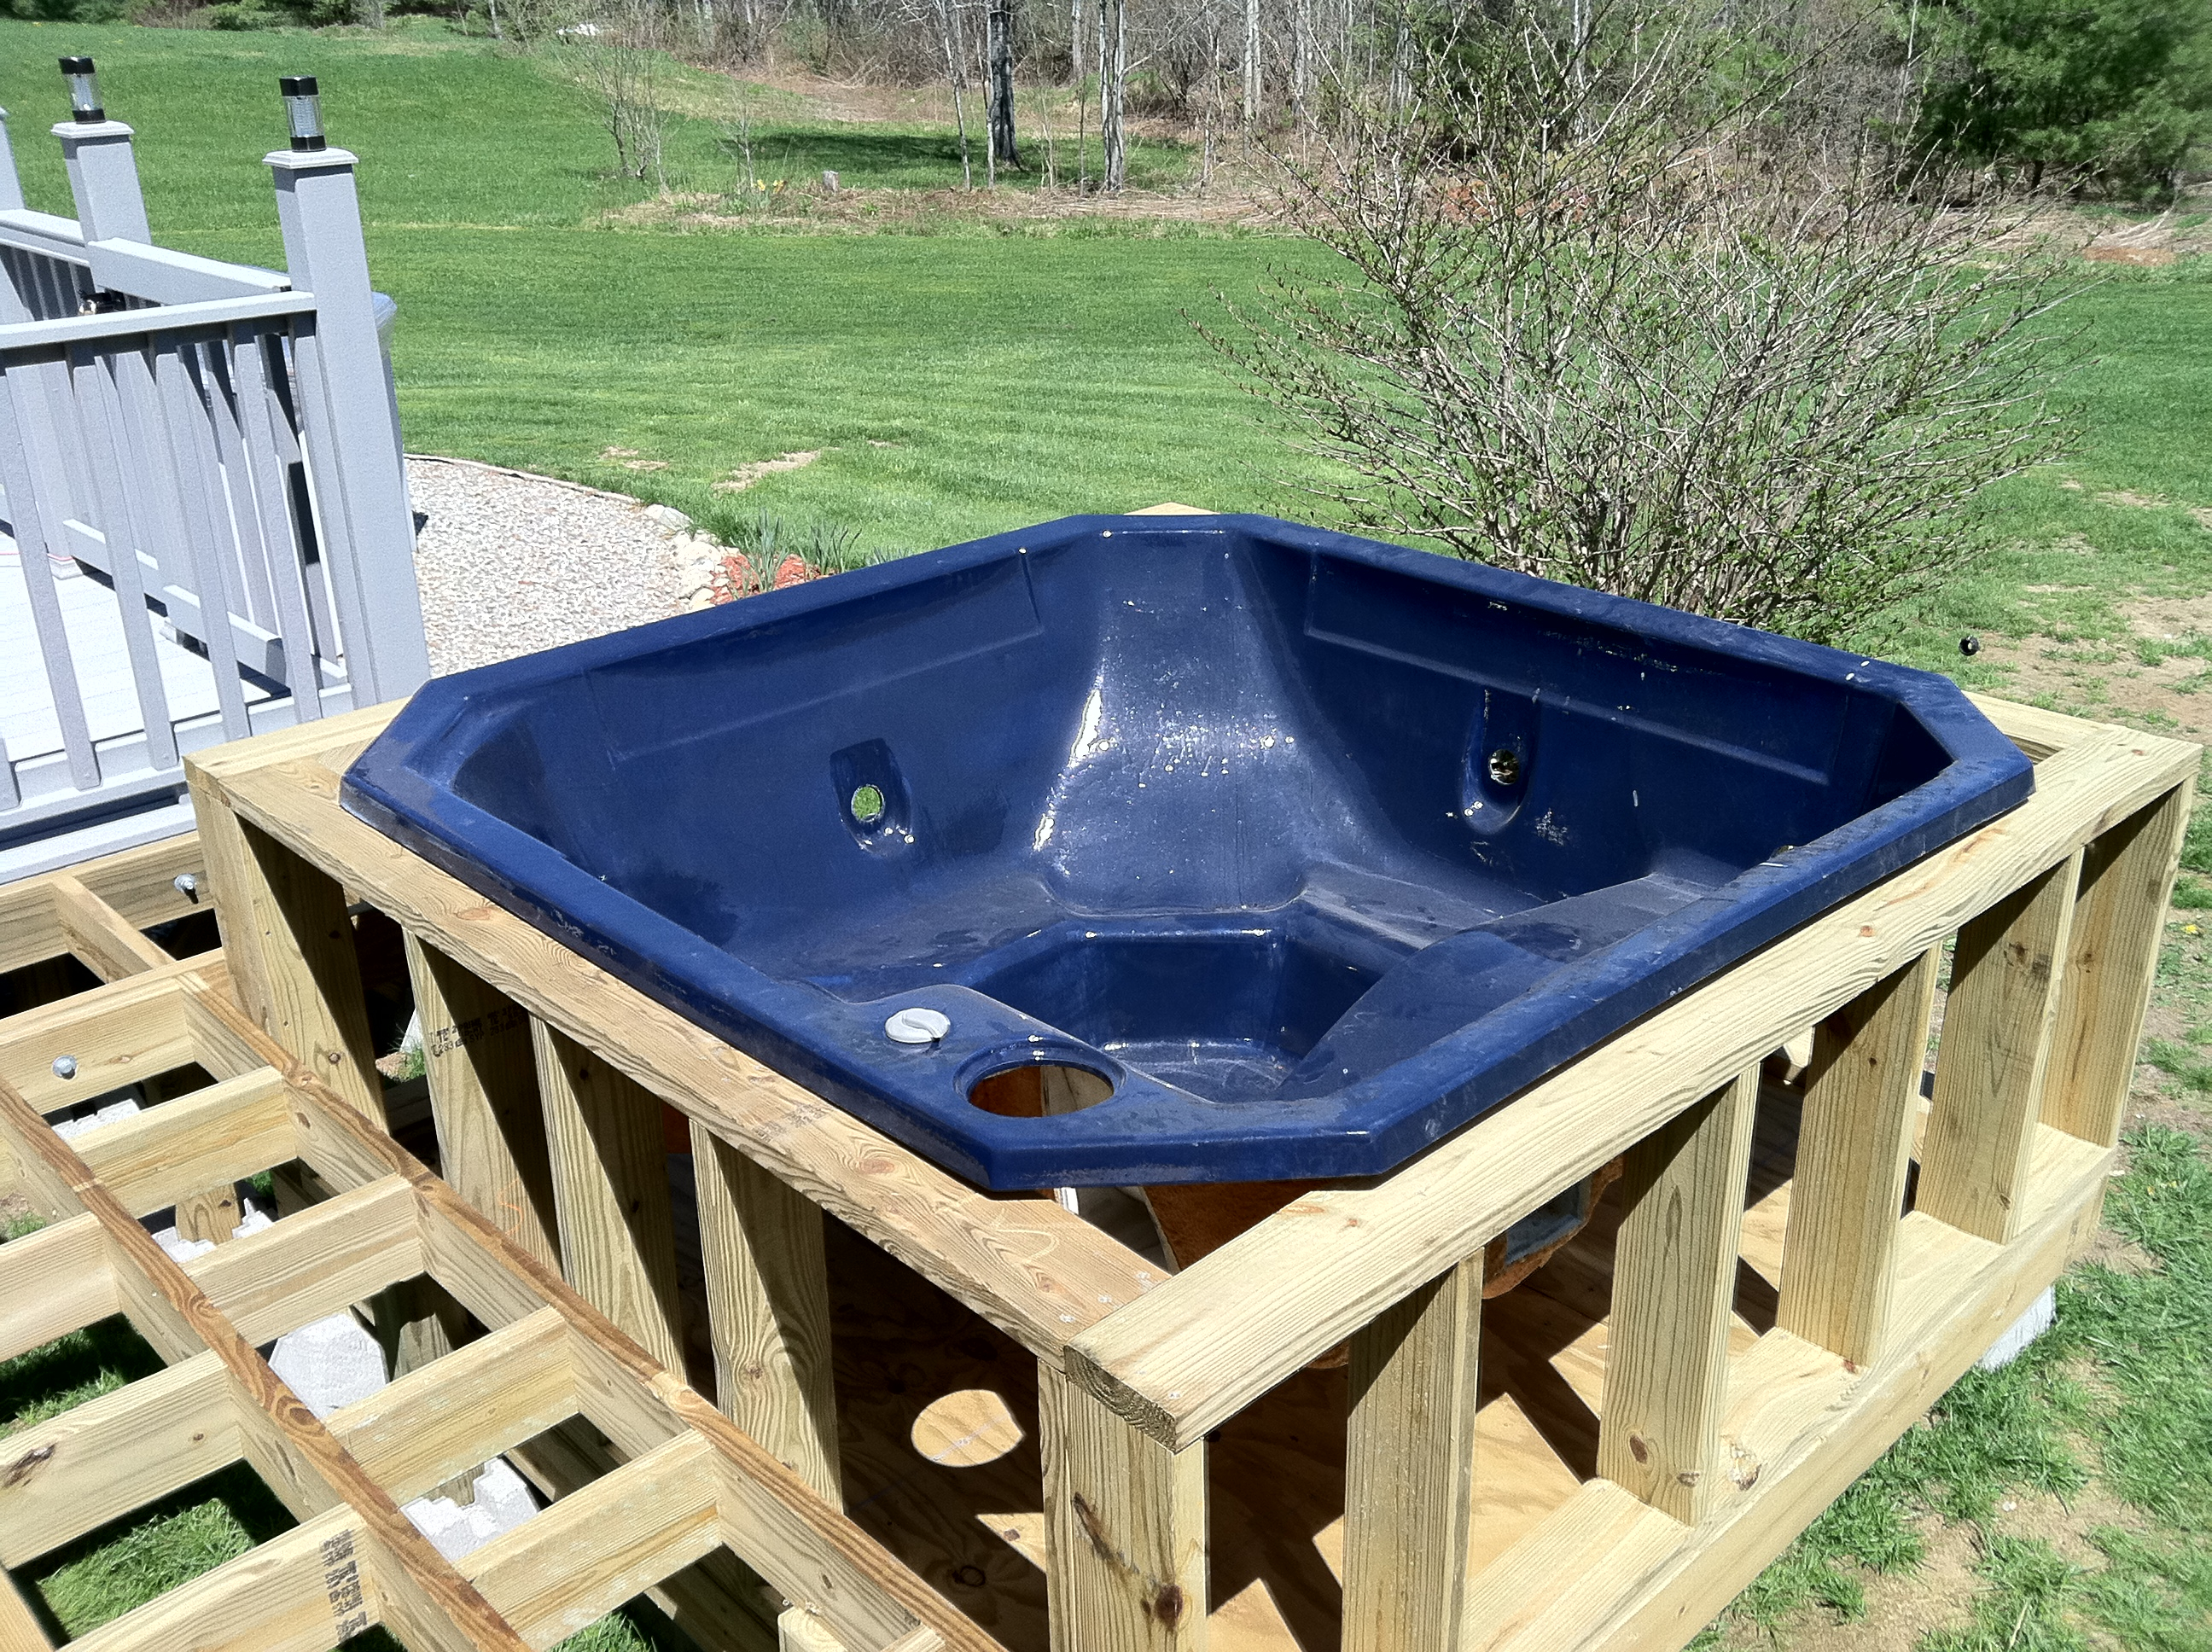 Hot Tub Walls And Walkway Supports Repair And Refinishing A Hot Tub within dimensions 2592 X 1936